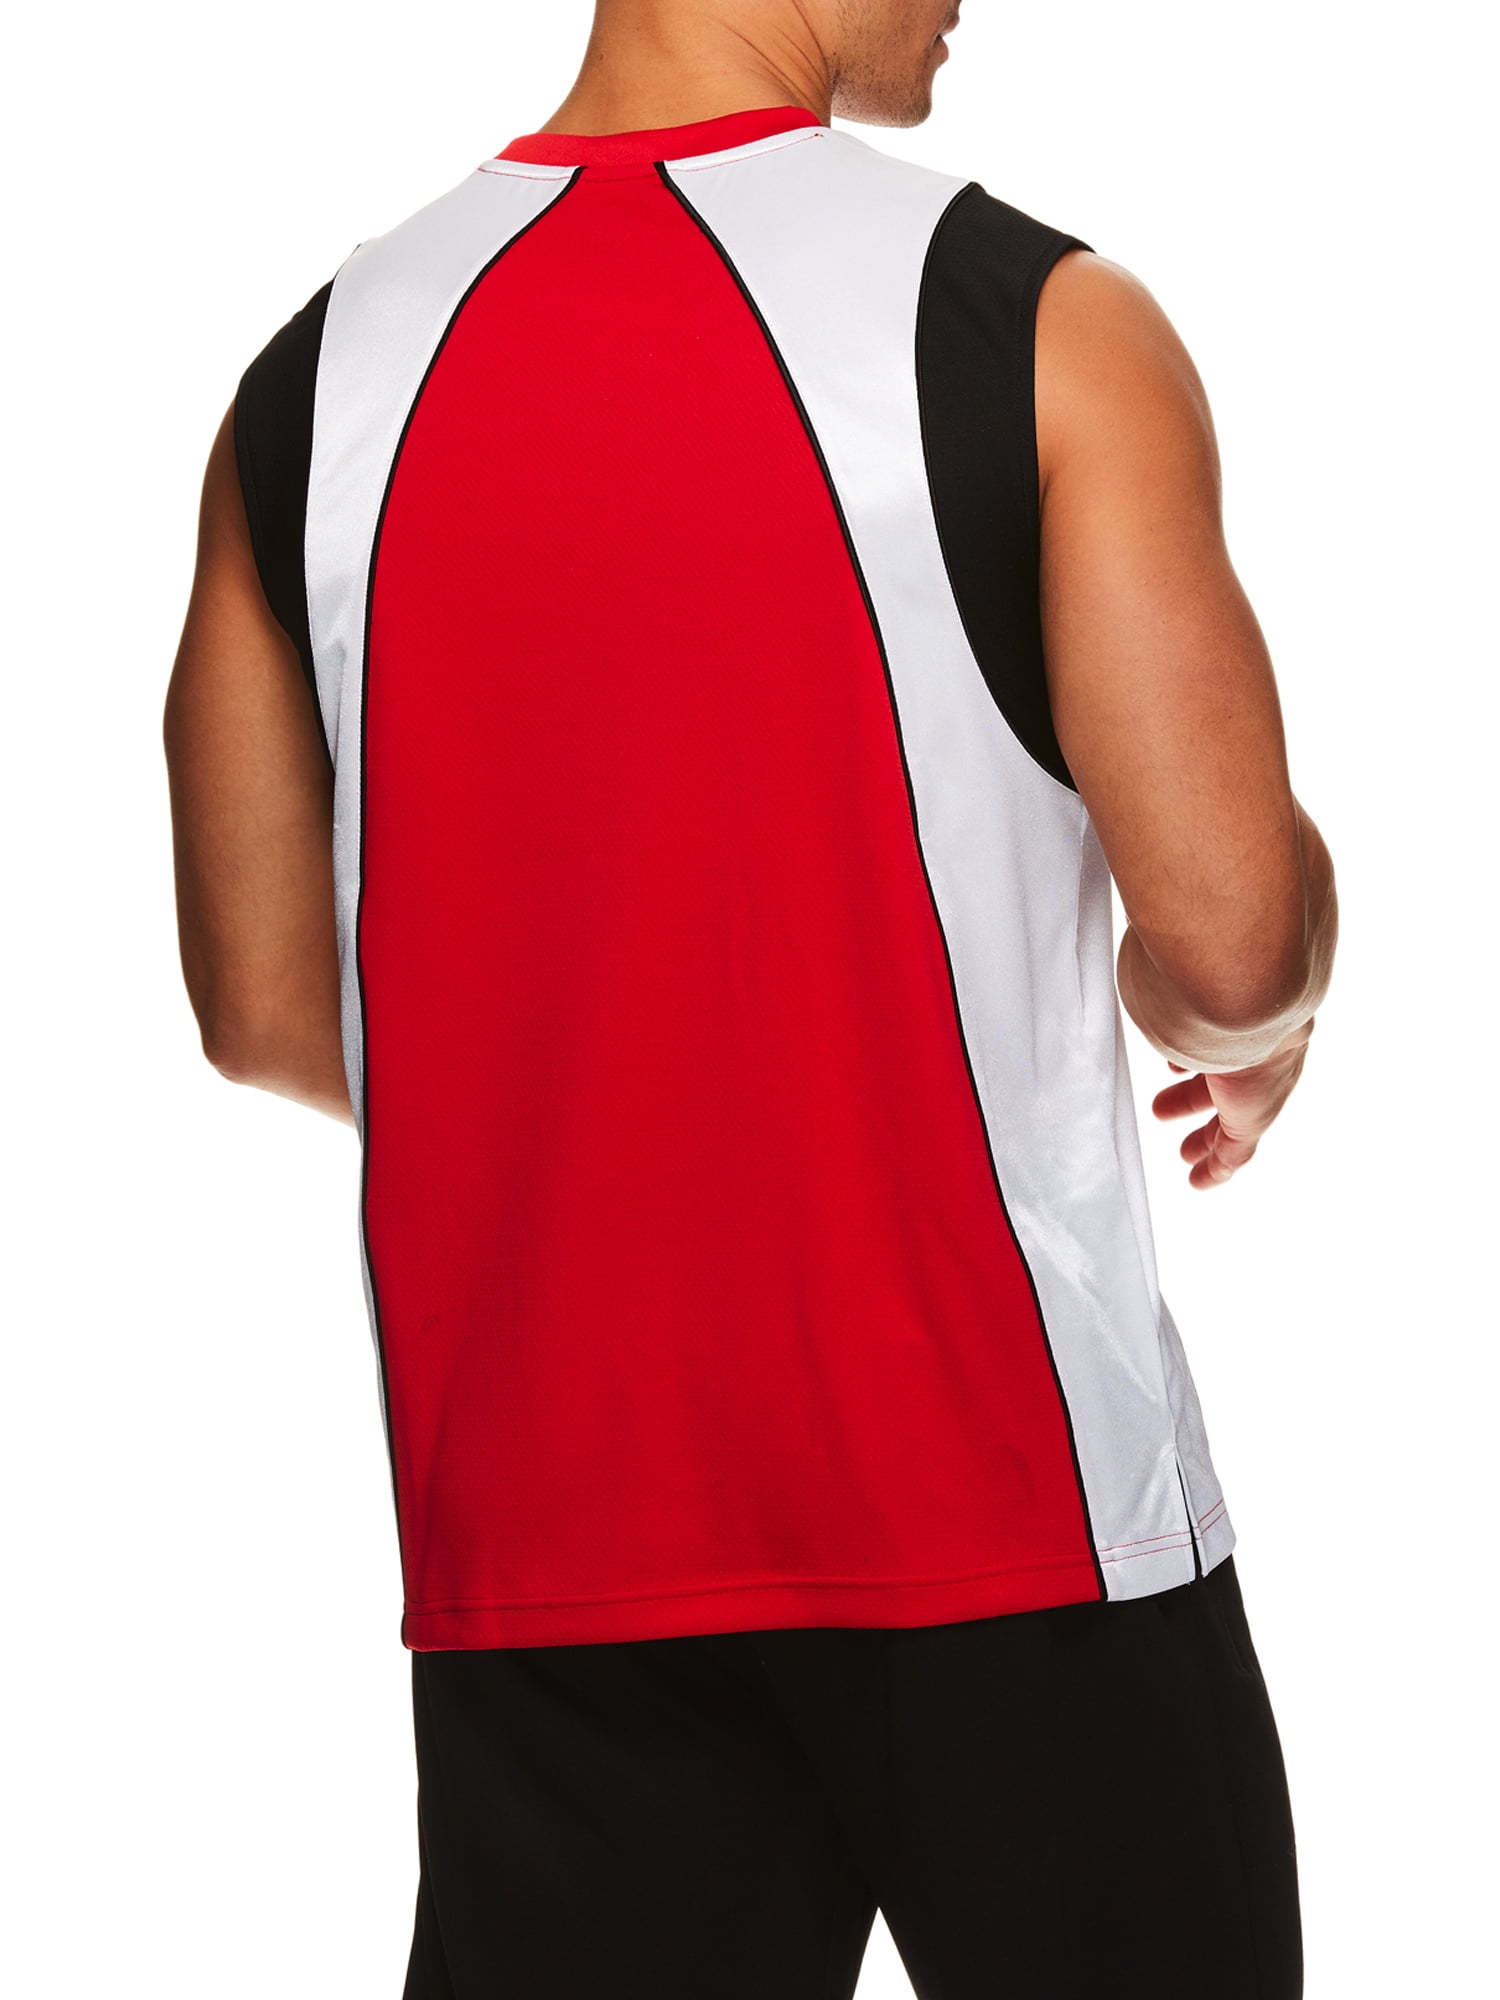 AND1 Men's Exile Sleeveless Jersey Tank Top, up to 2XL 